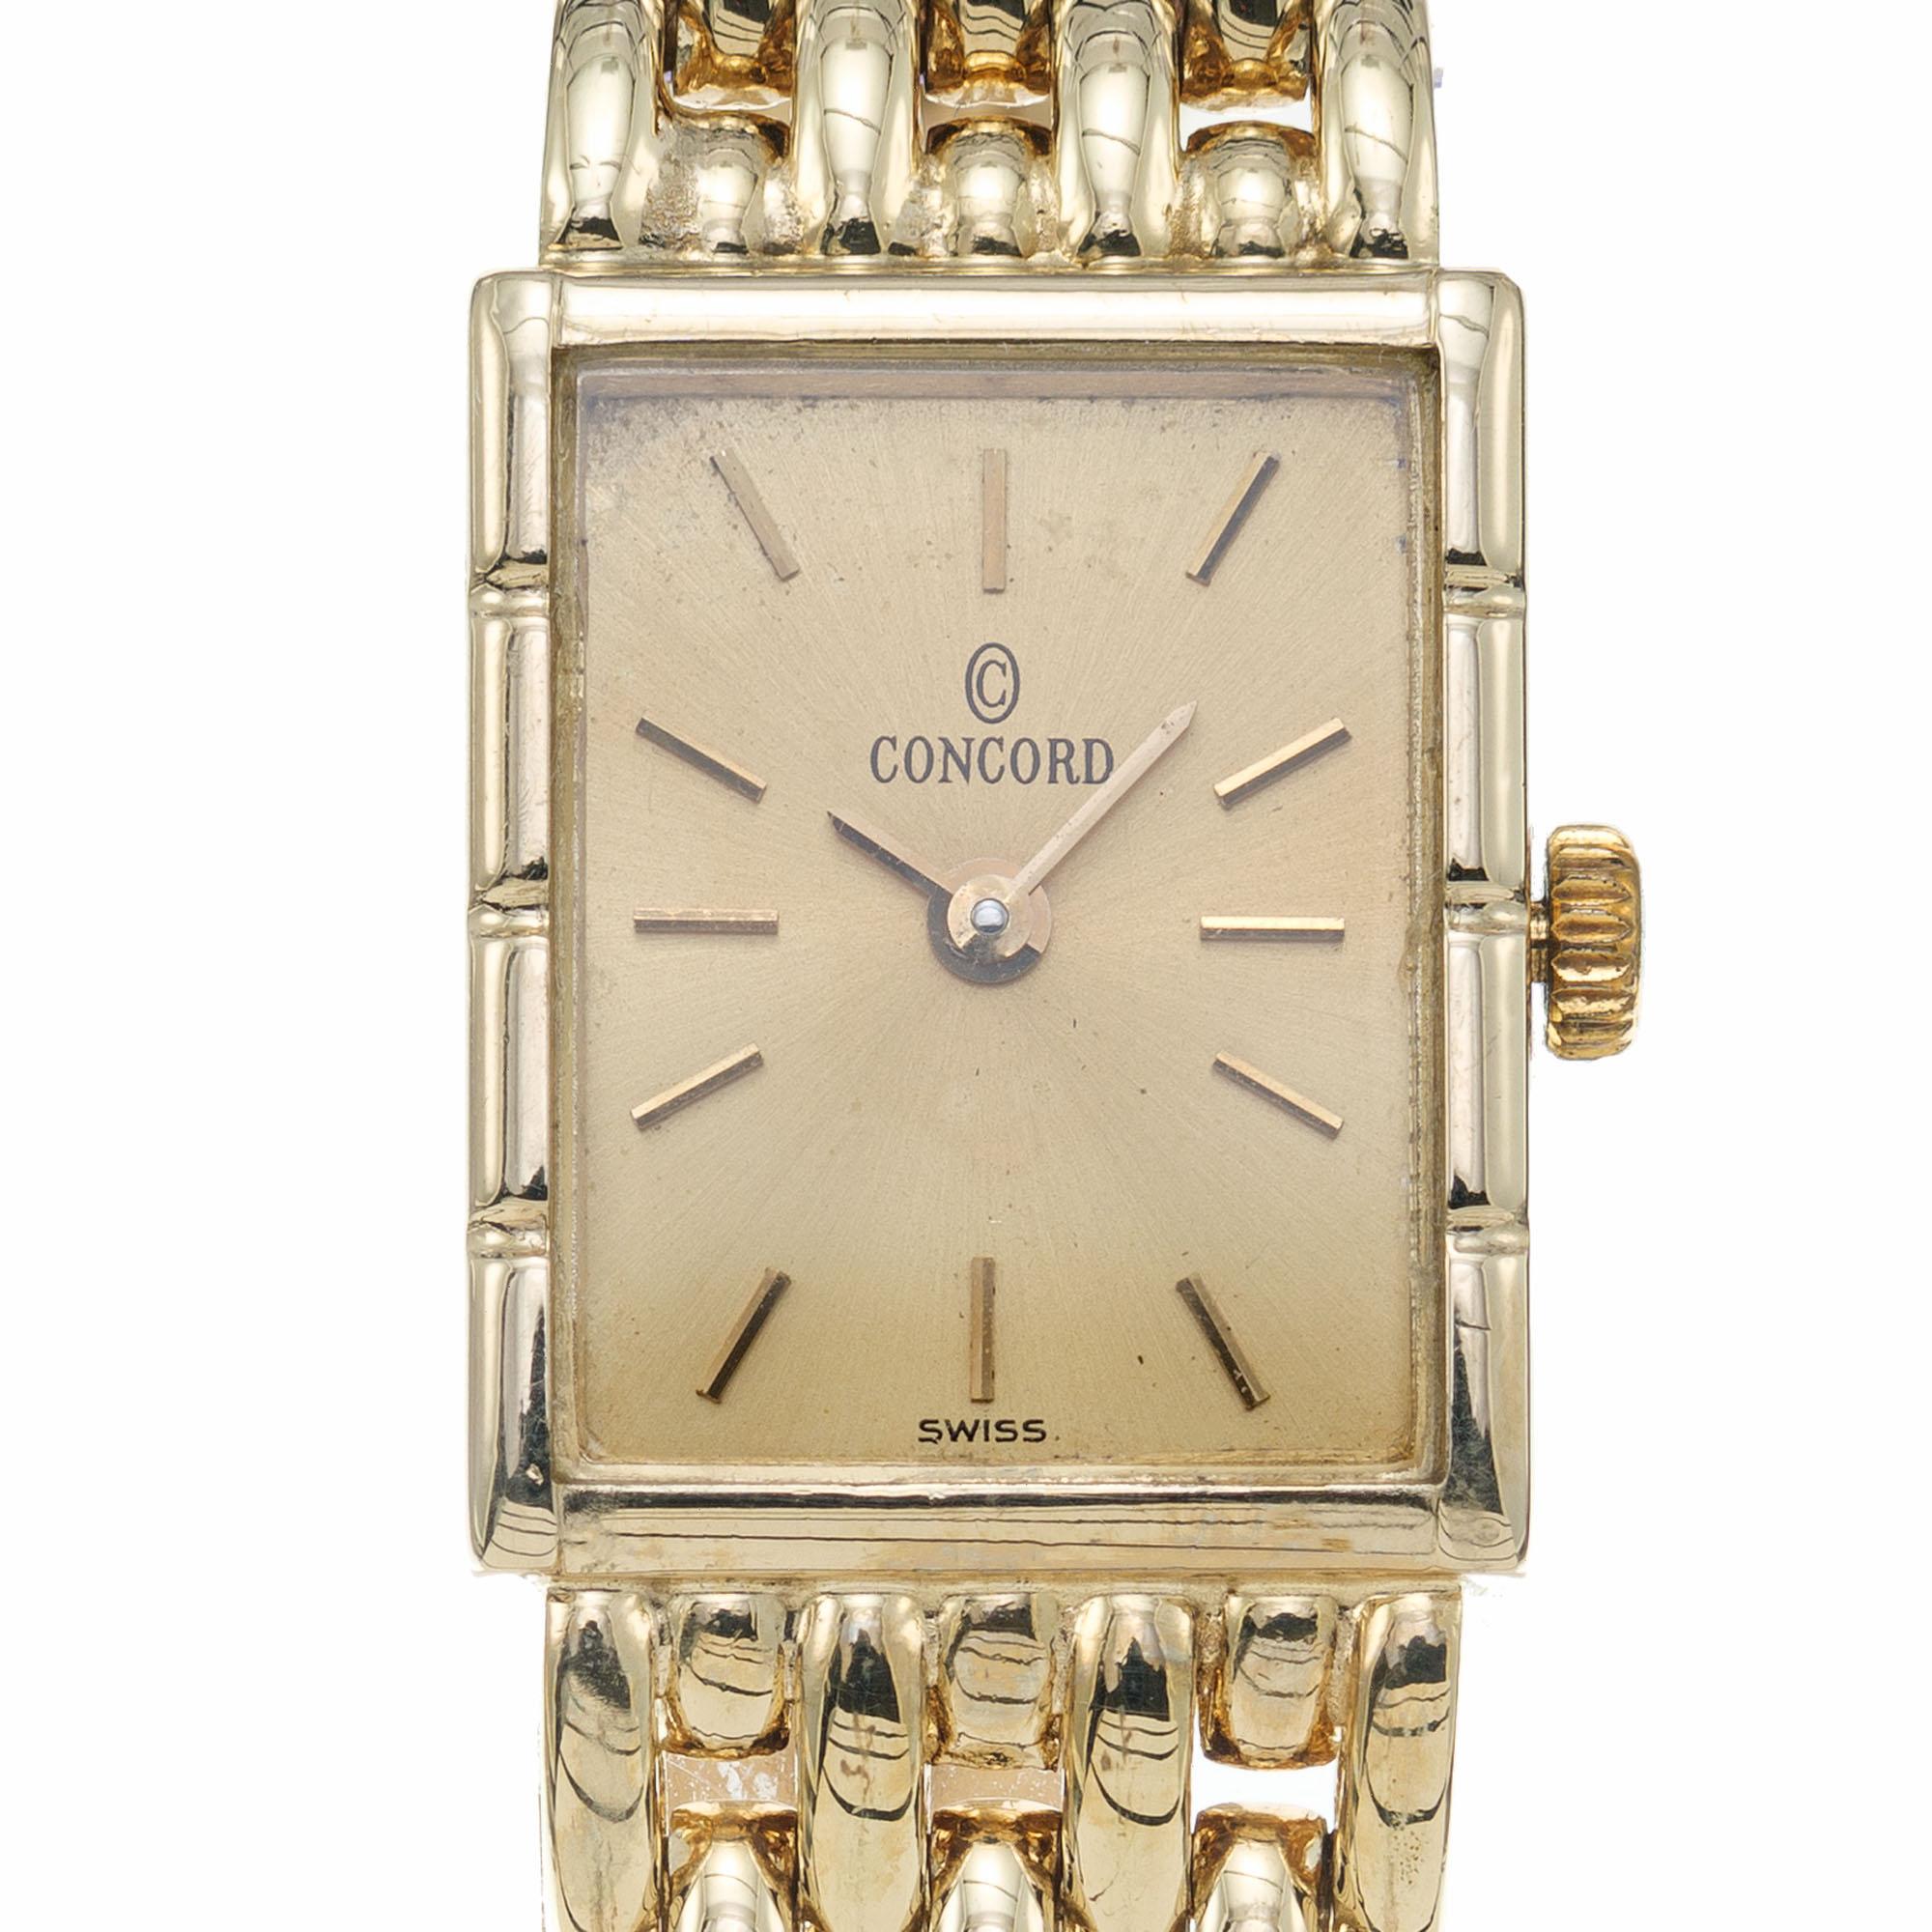 Quartz Concord ladies wristwatch with a rectangular case and 14k mesh panther style band. 

Length: 18.52mm
Width: 15mm
Weight: 38.5 grams
Band width at case: 12.84mm
Case thickness: 4.82mm
Band: 14k yellow gold panther band
Crystal: sapphire
Dial: